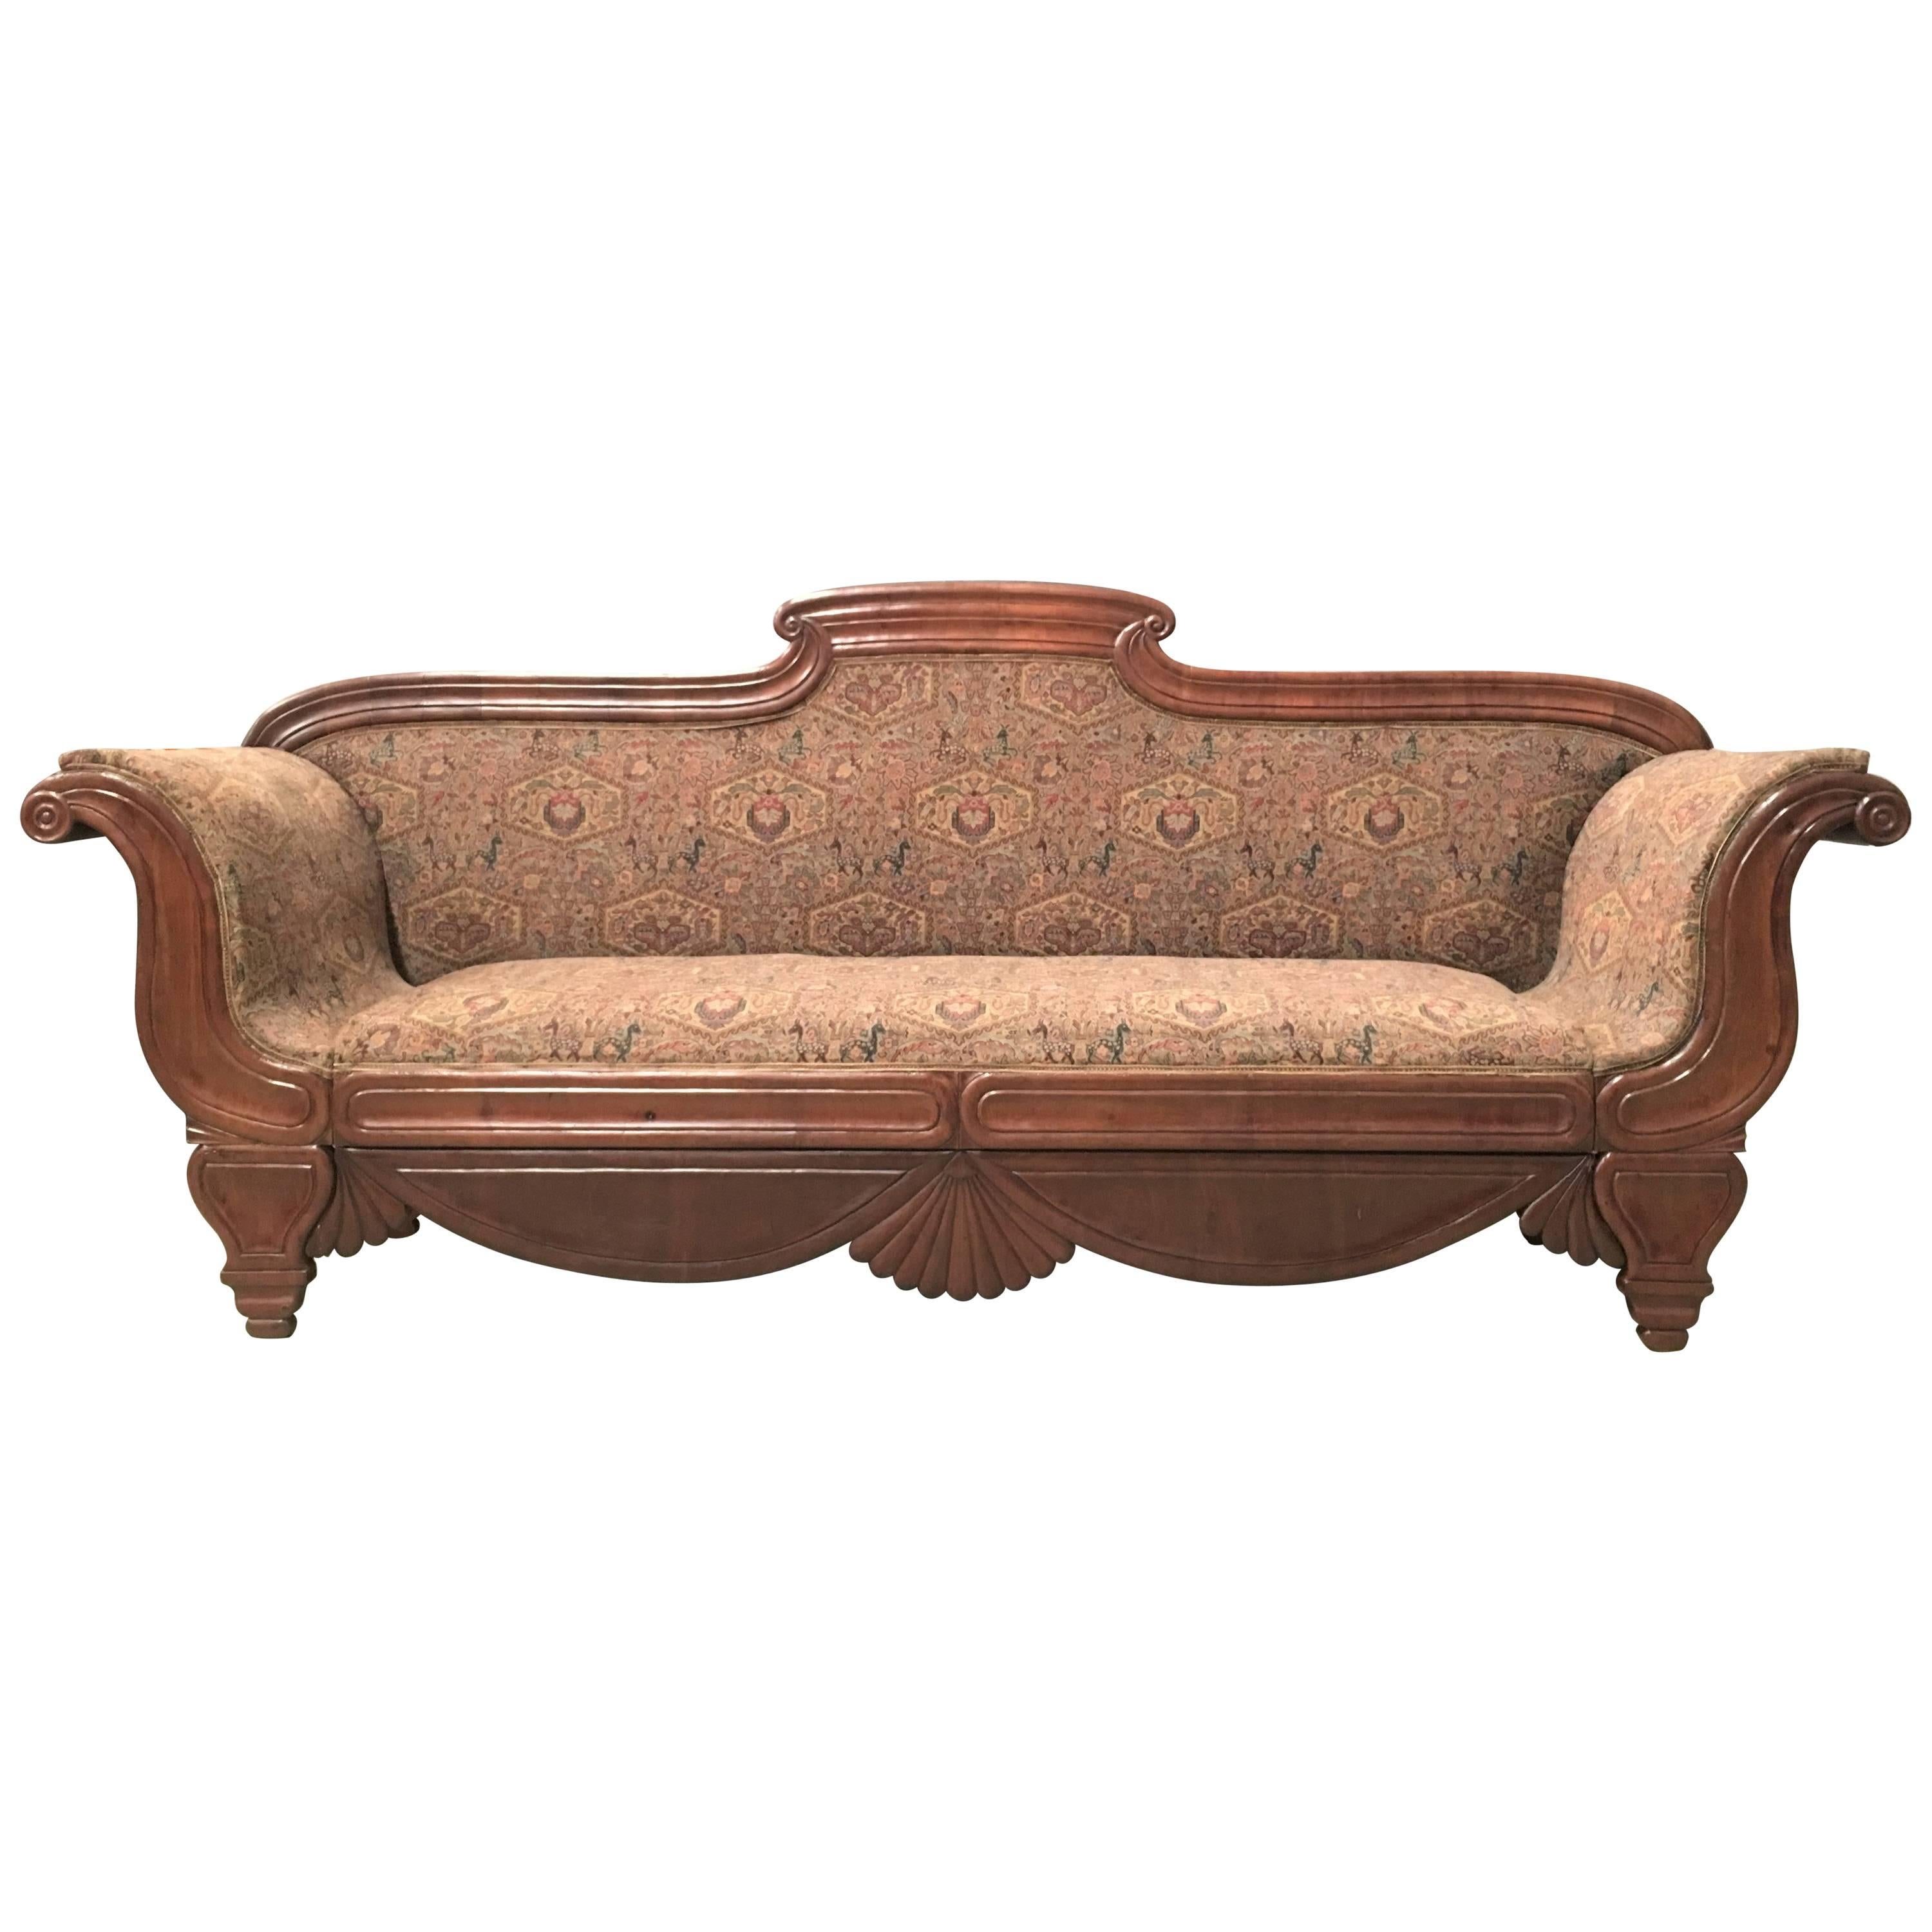 French Carved Walnut Bench, Sofa, Daybed Upholstered in Original Damask